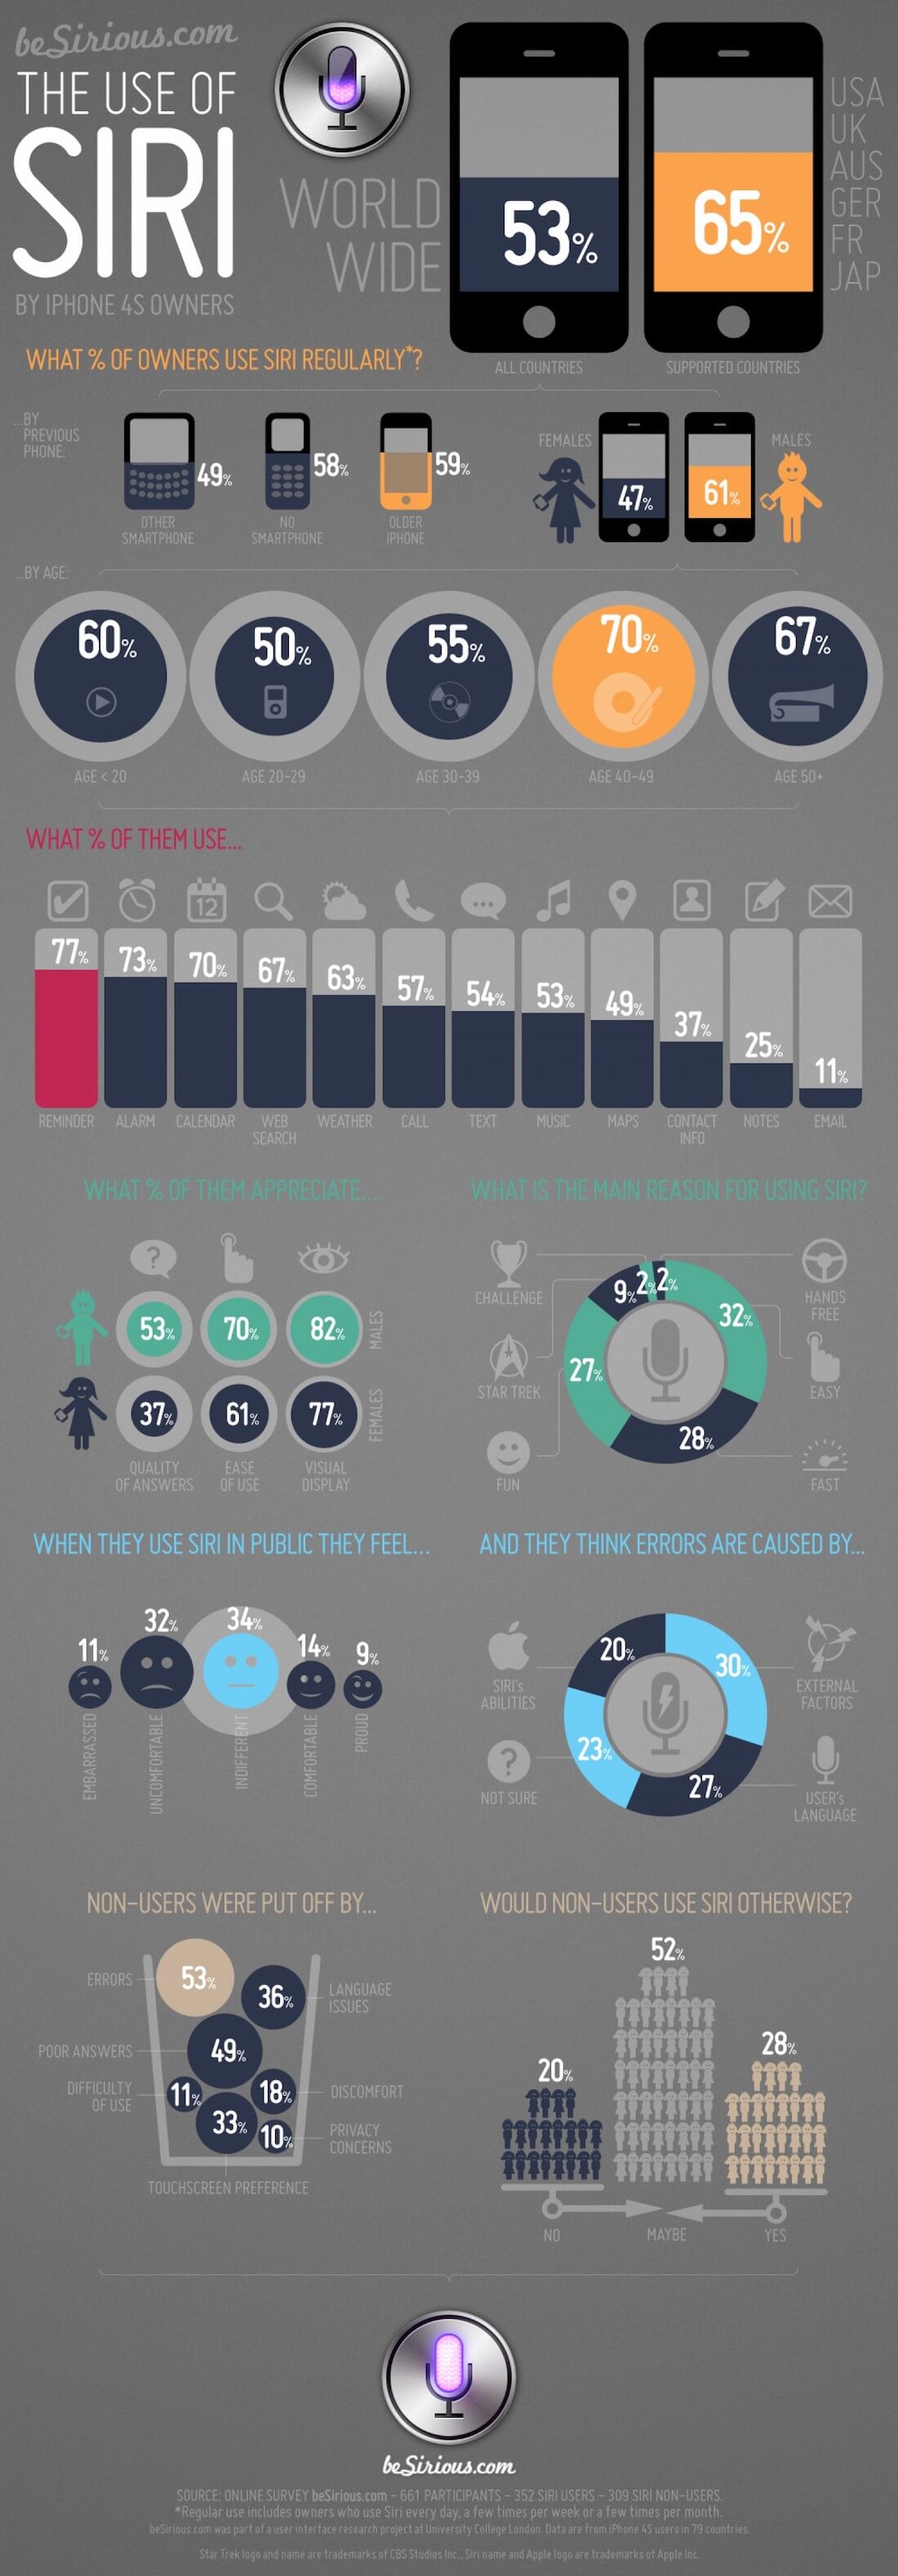 Capture écran infographie "The Use of Siri"